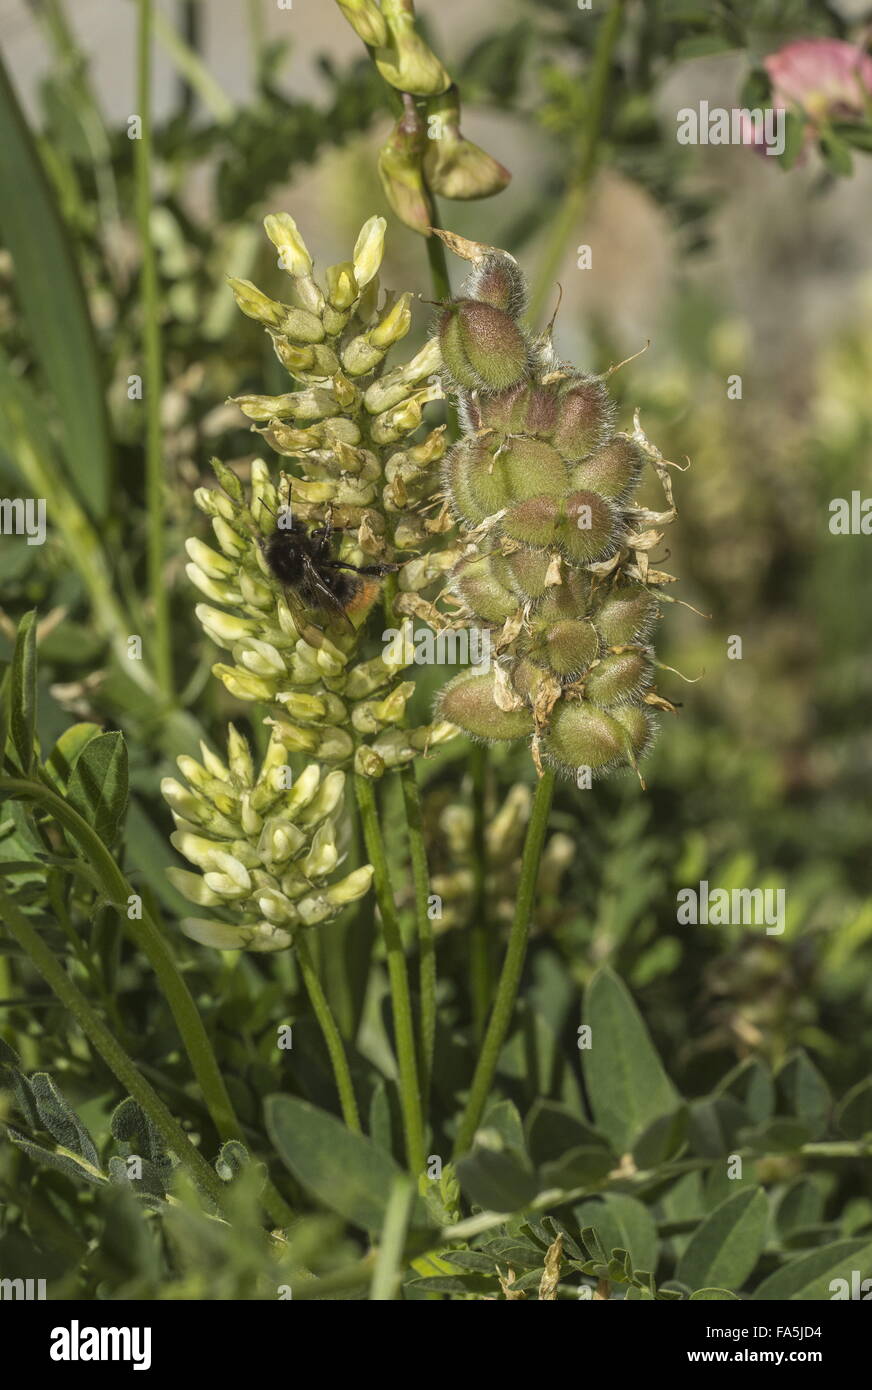 Chickpea milkvetch, Astragalus cicer, in flower and fruit. East Europe. Stock Photo